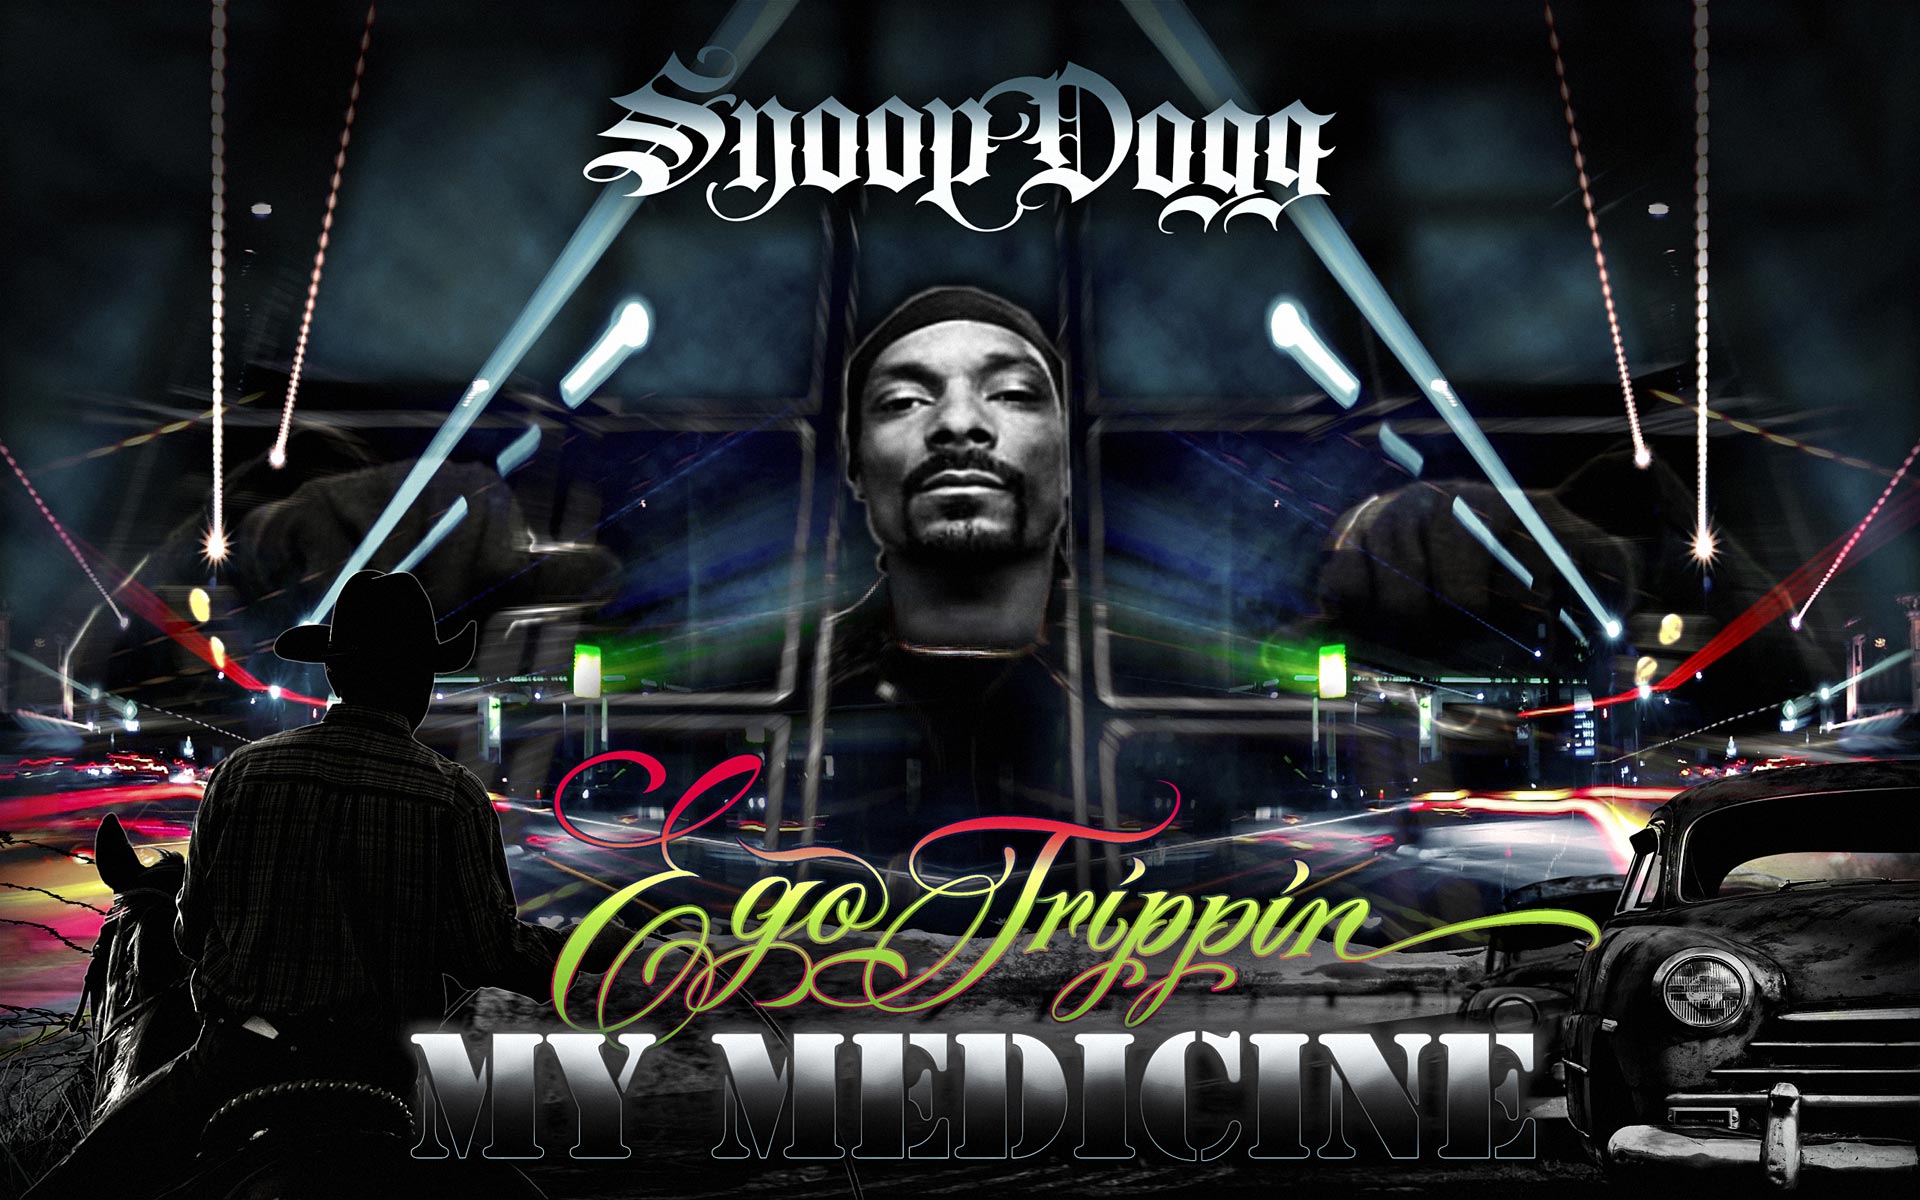 Share This Image  Snoop Dogg Wallpaper Iphone PNG Image  Transparent PNG  Free Download on SeekPNG